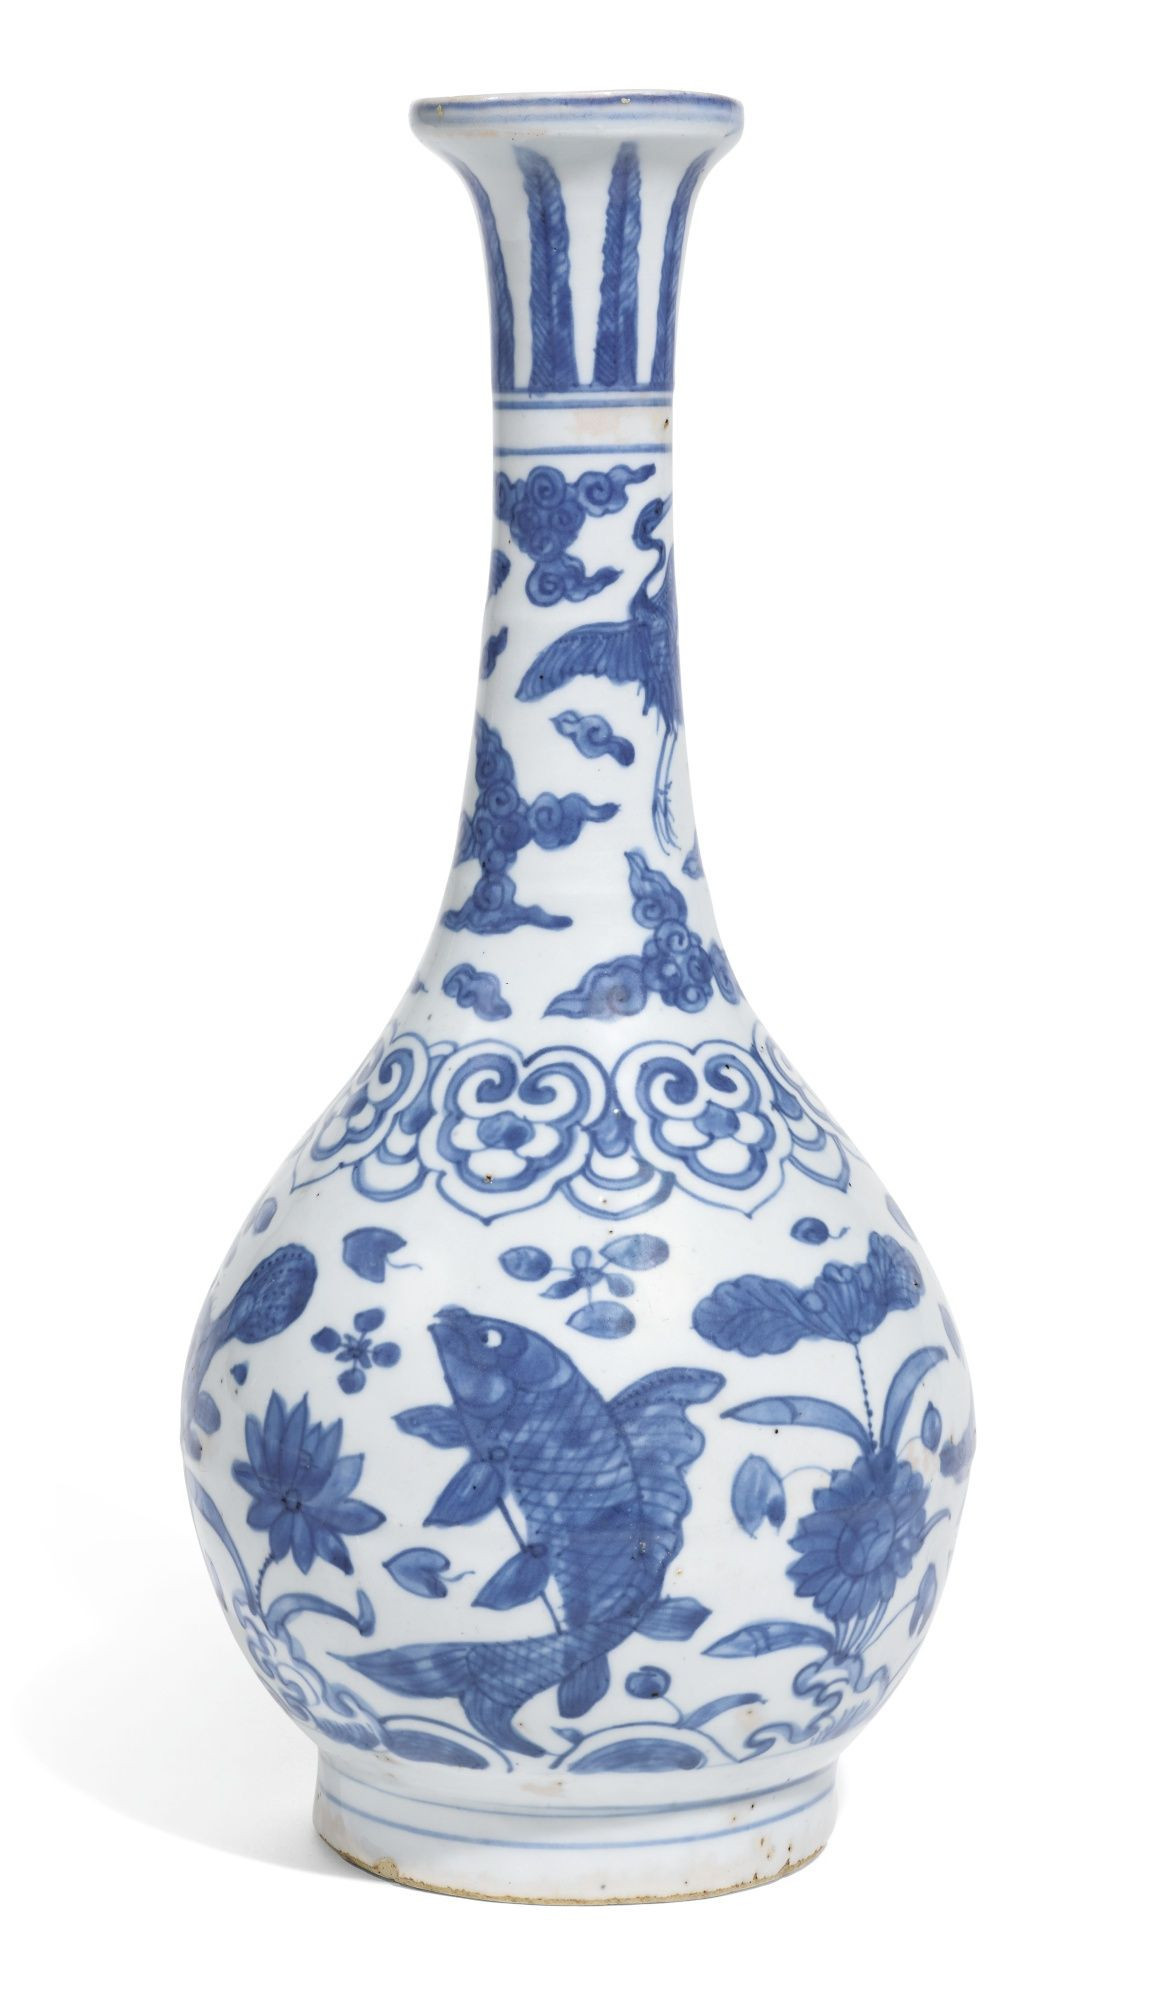 27 attractive Qing Dynasty Vase 2022 free download qing dynasty vase of stock of blue and white vases vases artificial plants collection intended for blue and white vases gallery a blue and white bottle vase ming dynasty jiajing wanli period